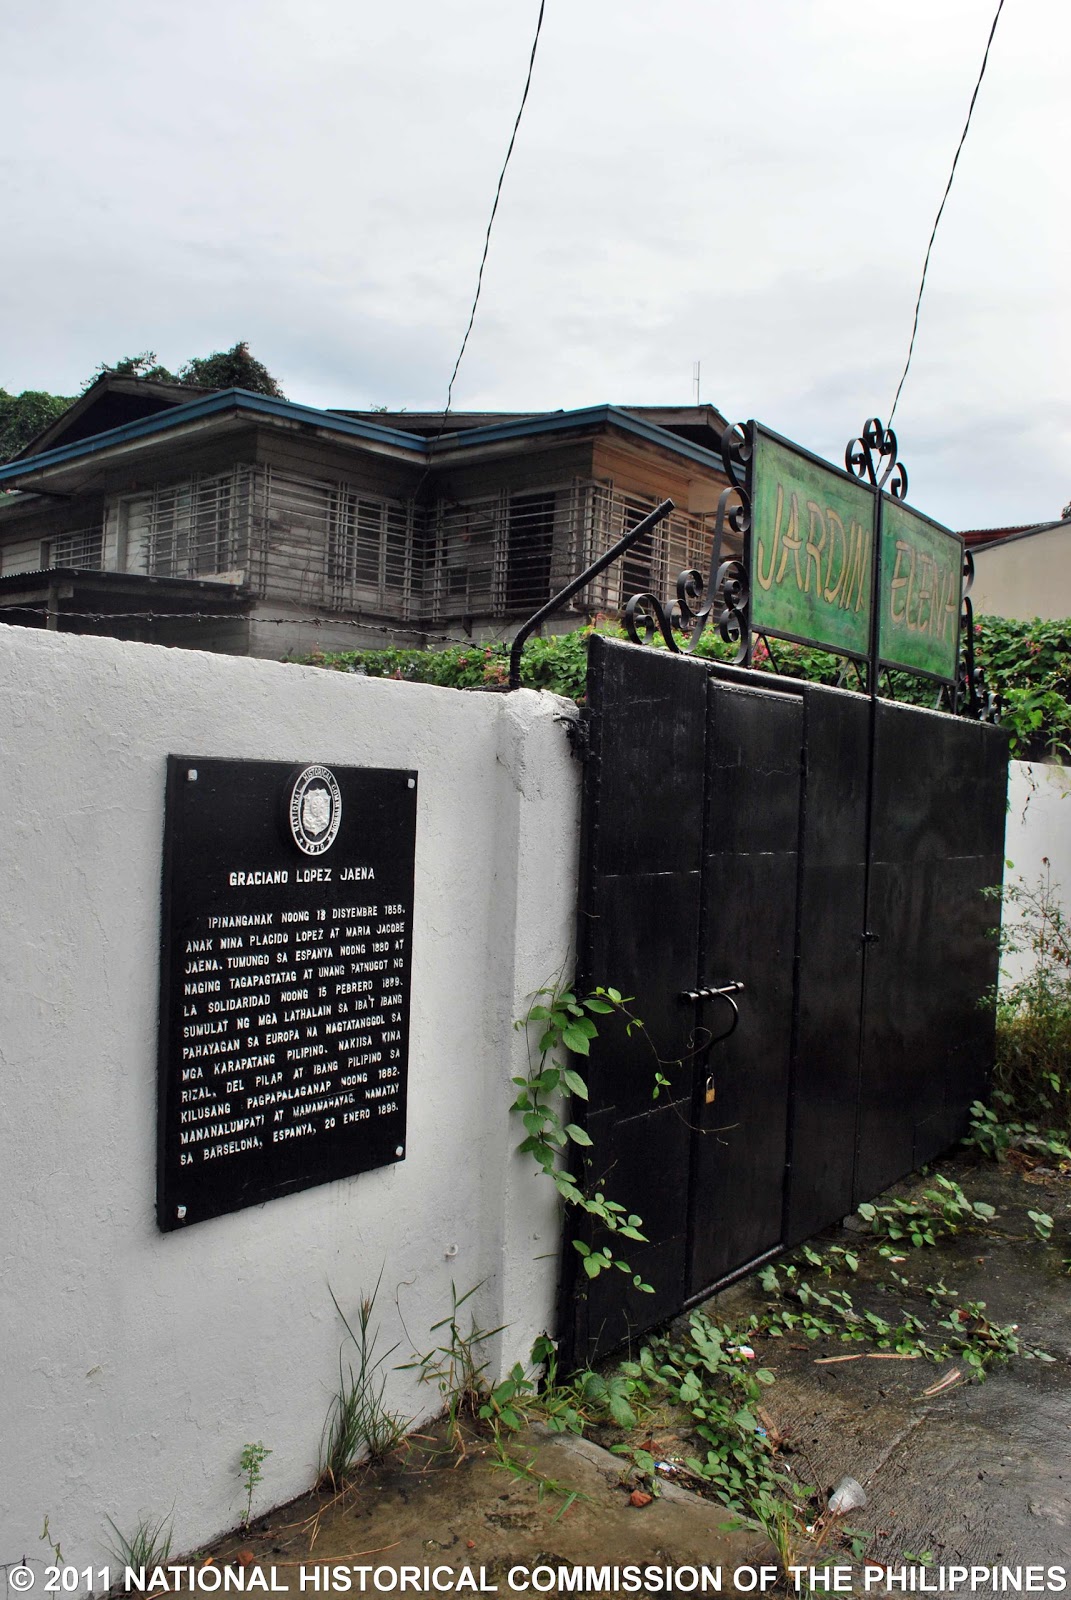 National Registry of Historic Sites and Structures in the Philippines